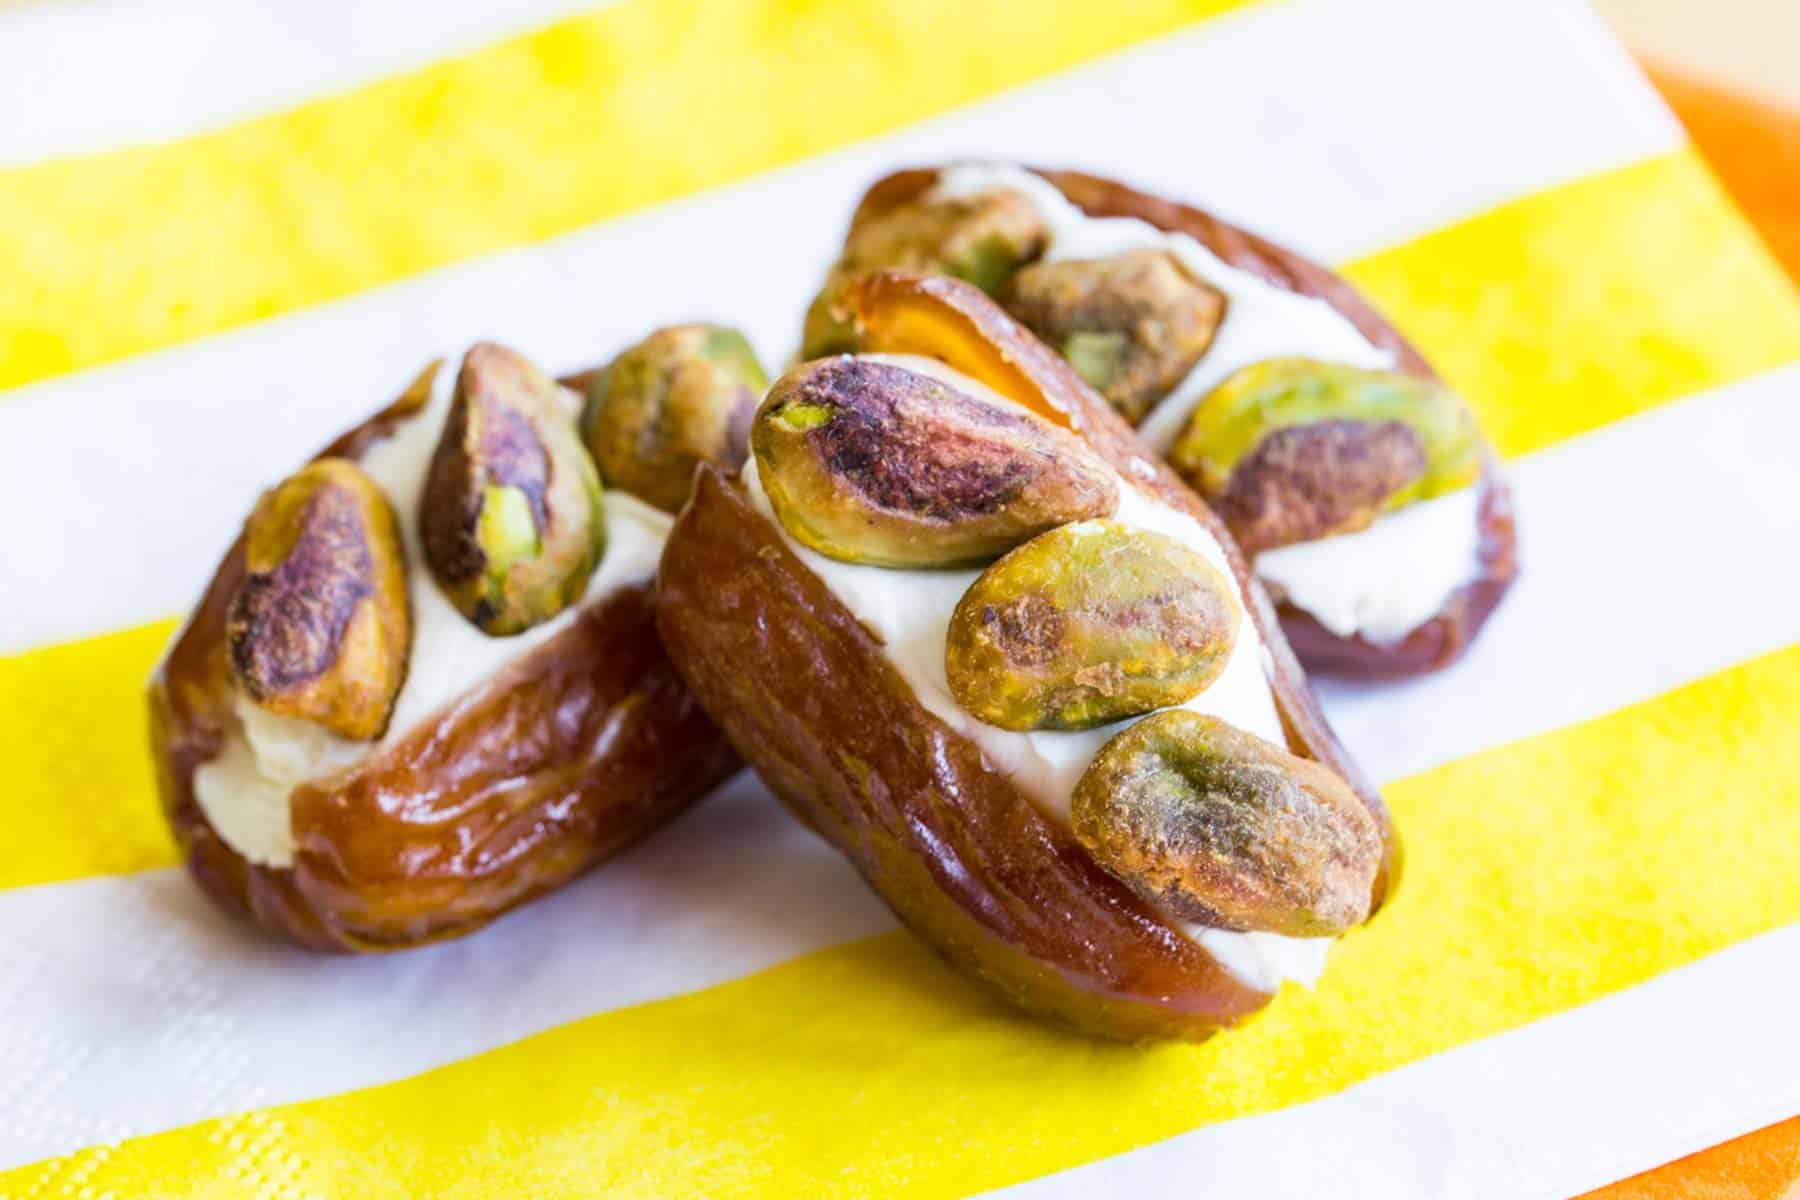 A few dates stuffed with cream cheese and three pistachios each on a yellow and white striped napkin.